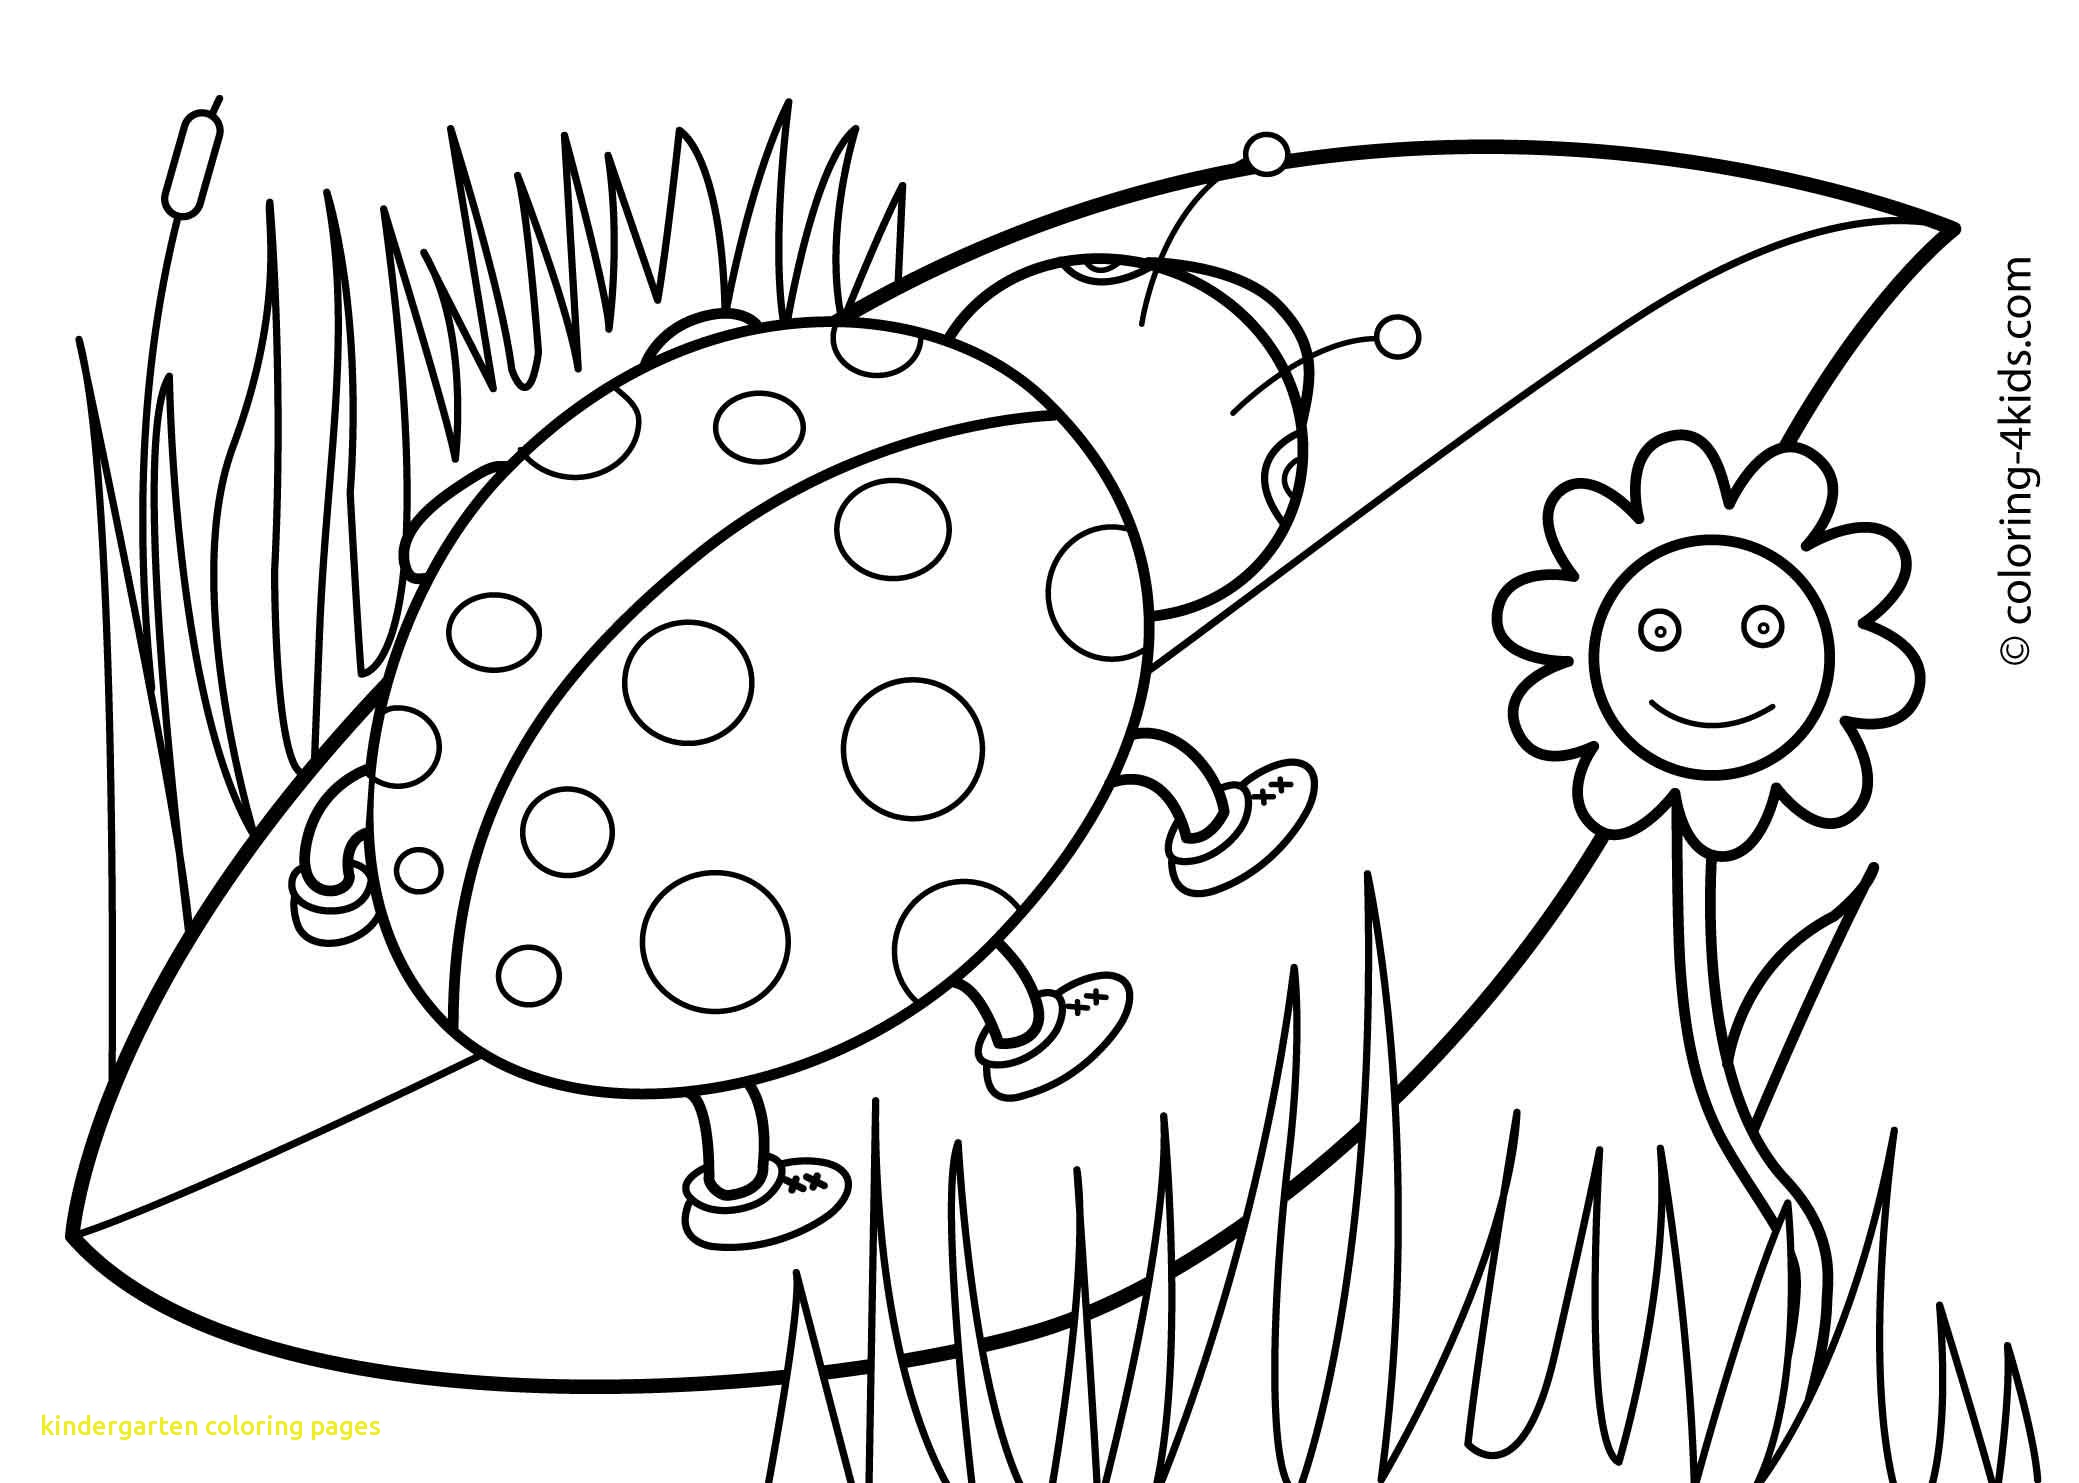 free printable kindergarten coloring pages for kids colouring